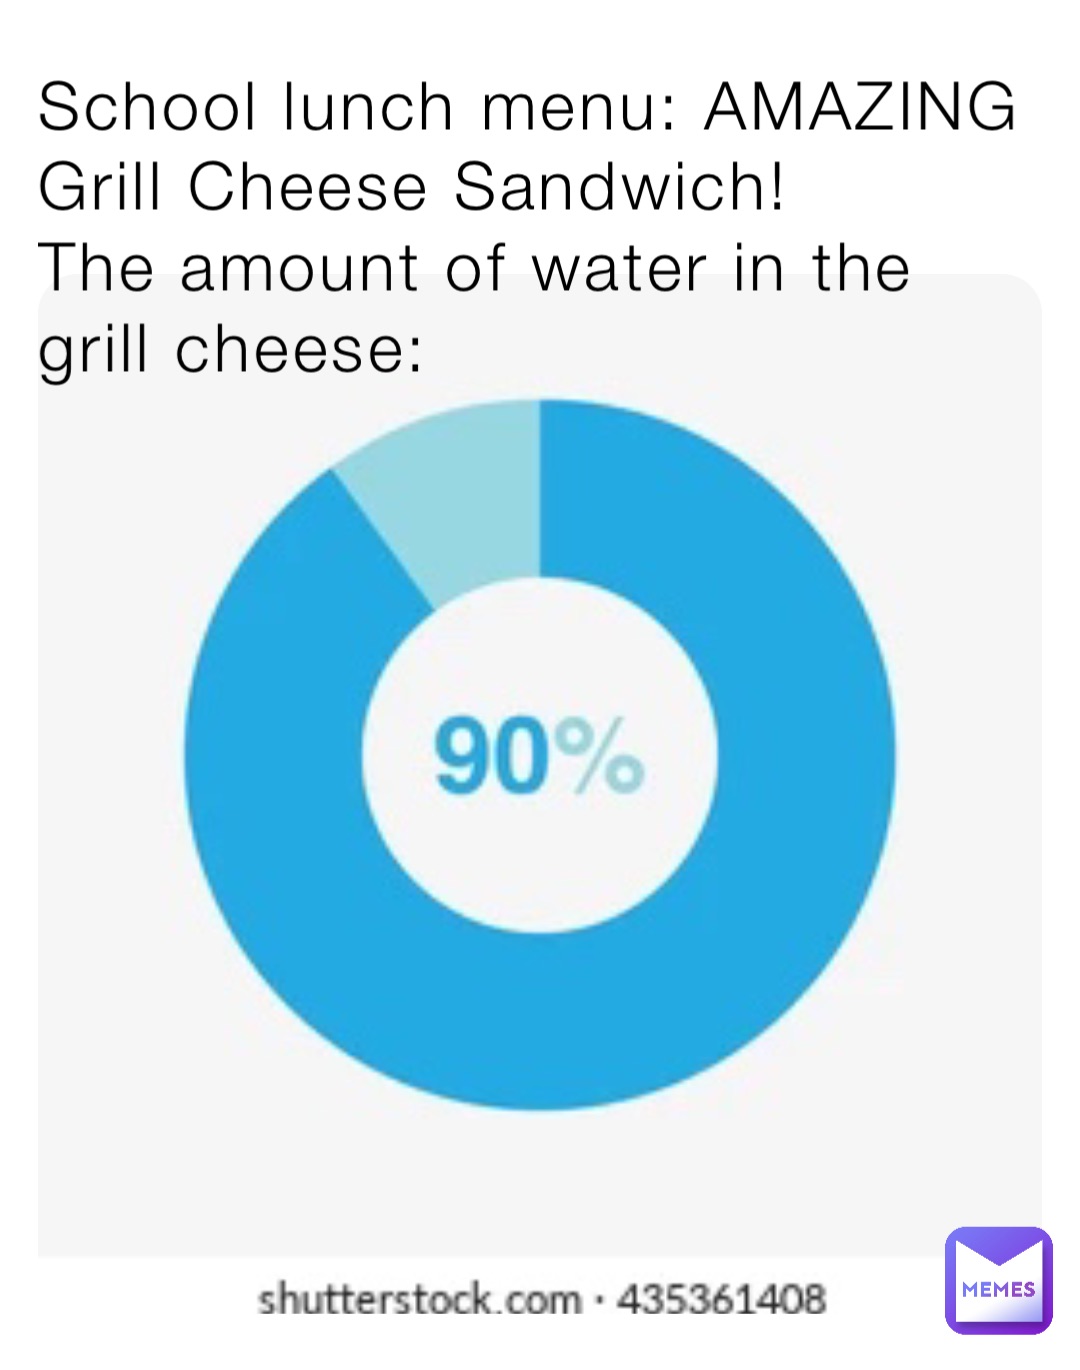 School lunch menu: AMAZING Grill Cheese Sandwich!
The amount of water in the grill cheese: